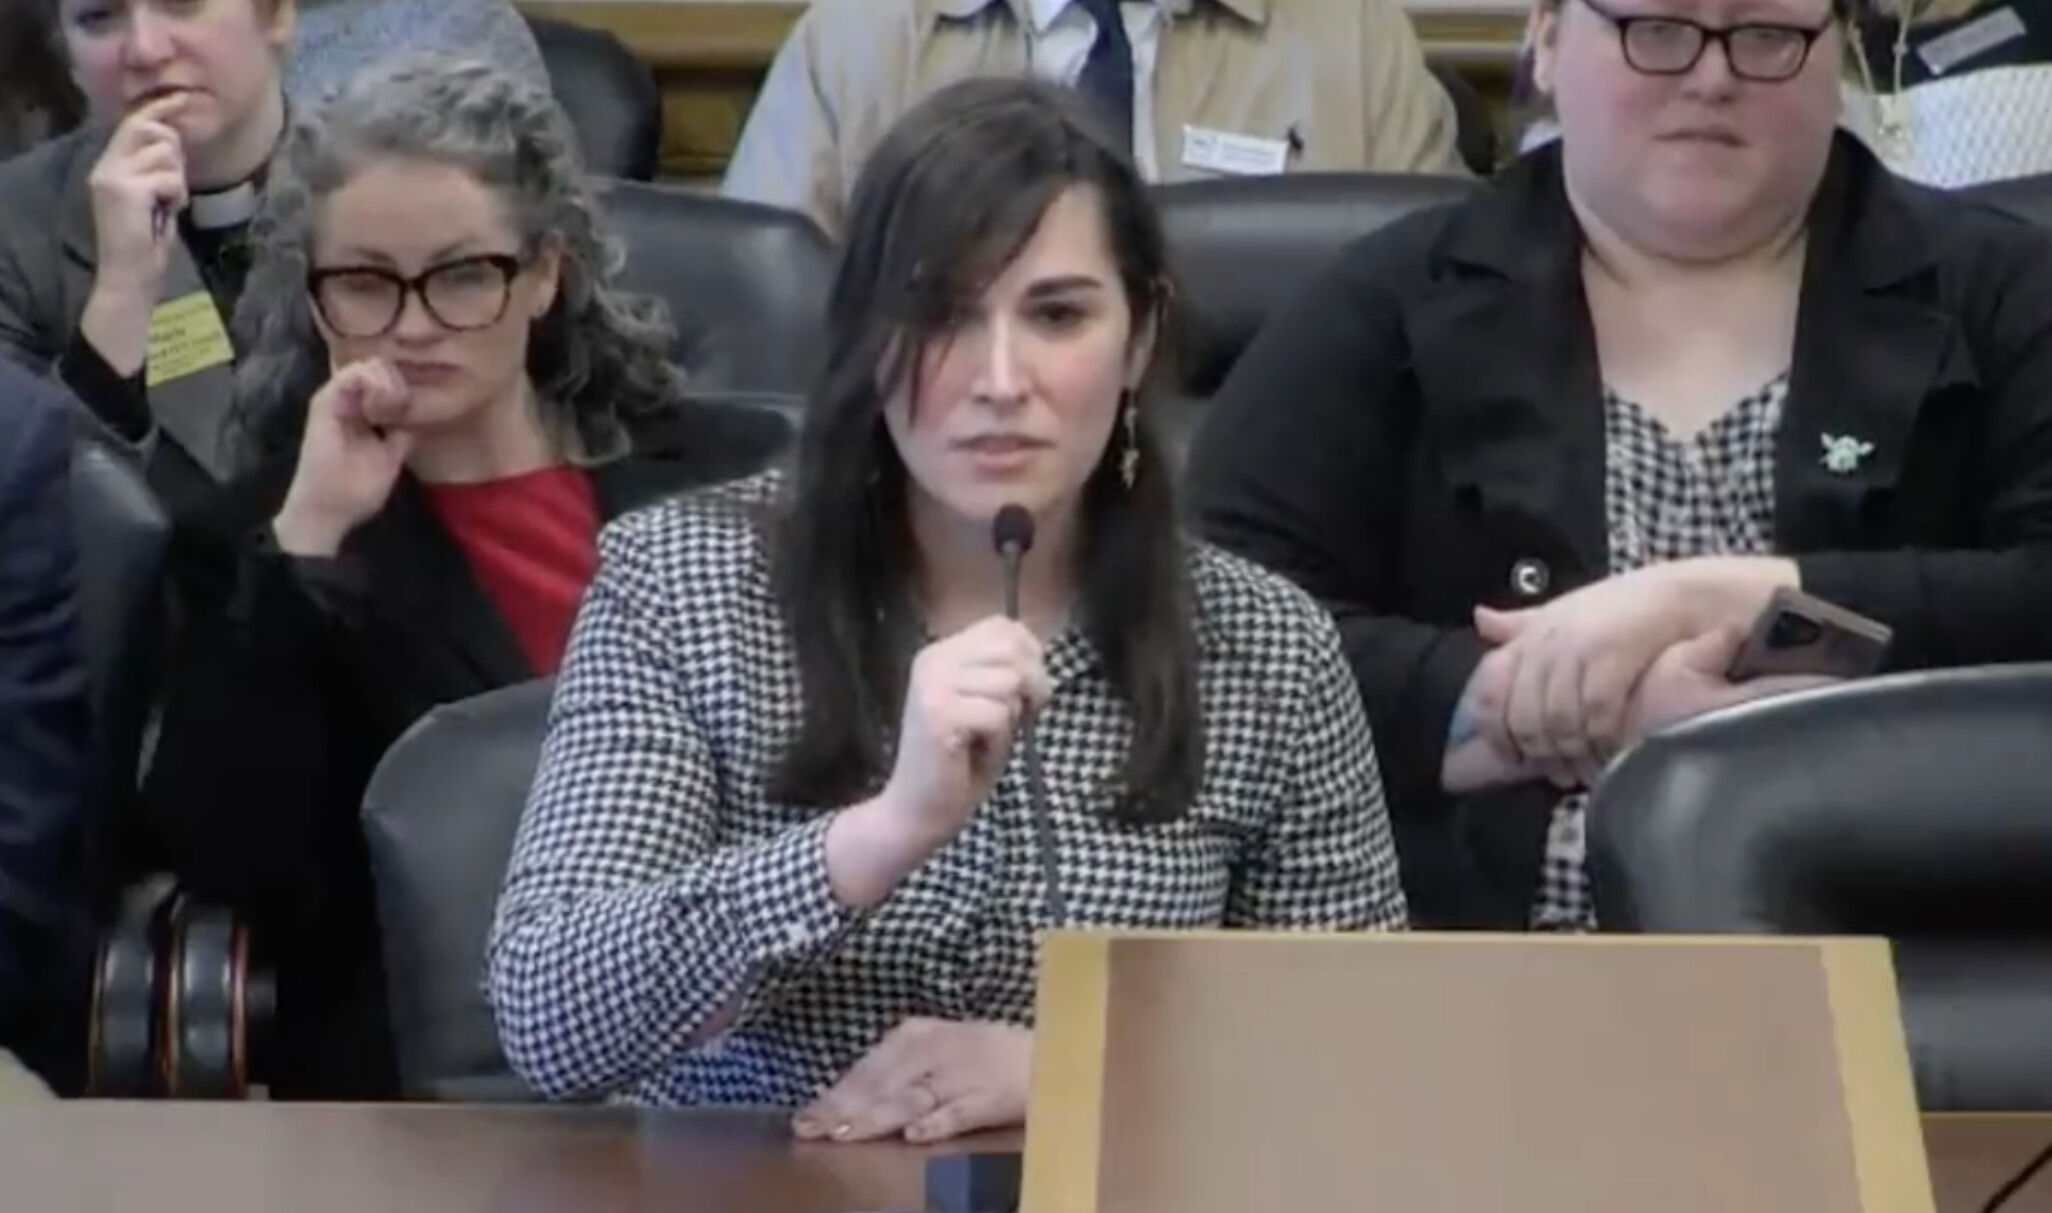 GOP lawmaker booed for asking trans doctor about her genitalia at public hearing